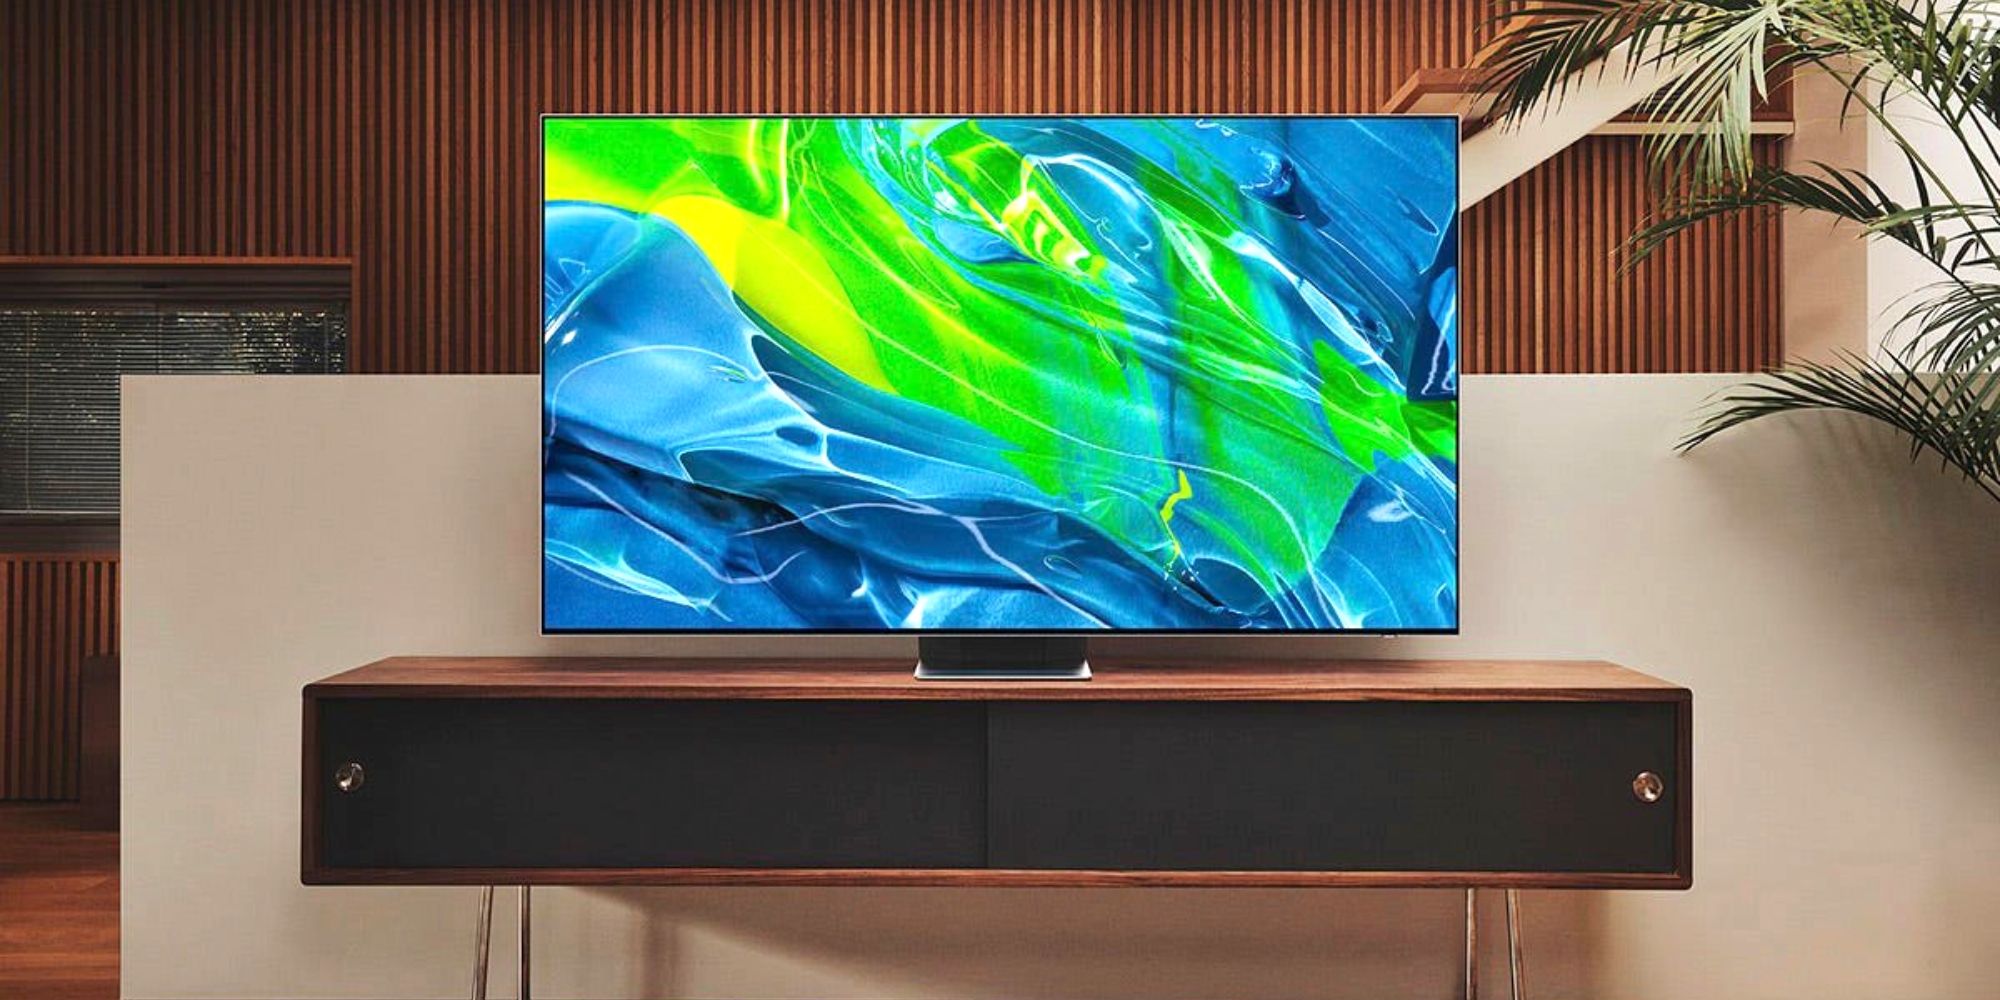 Image of the Samsung 65-inch 4K Smart OLED TV mounted on a wall